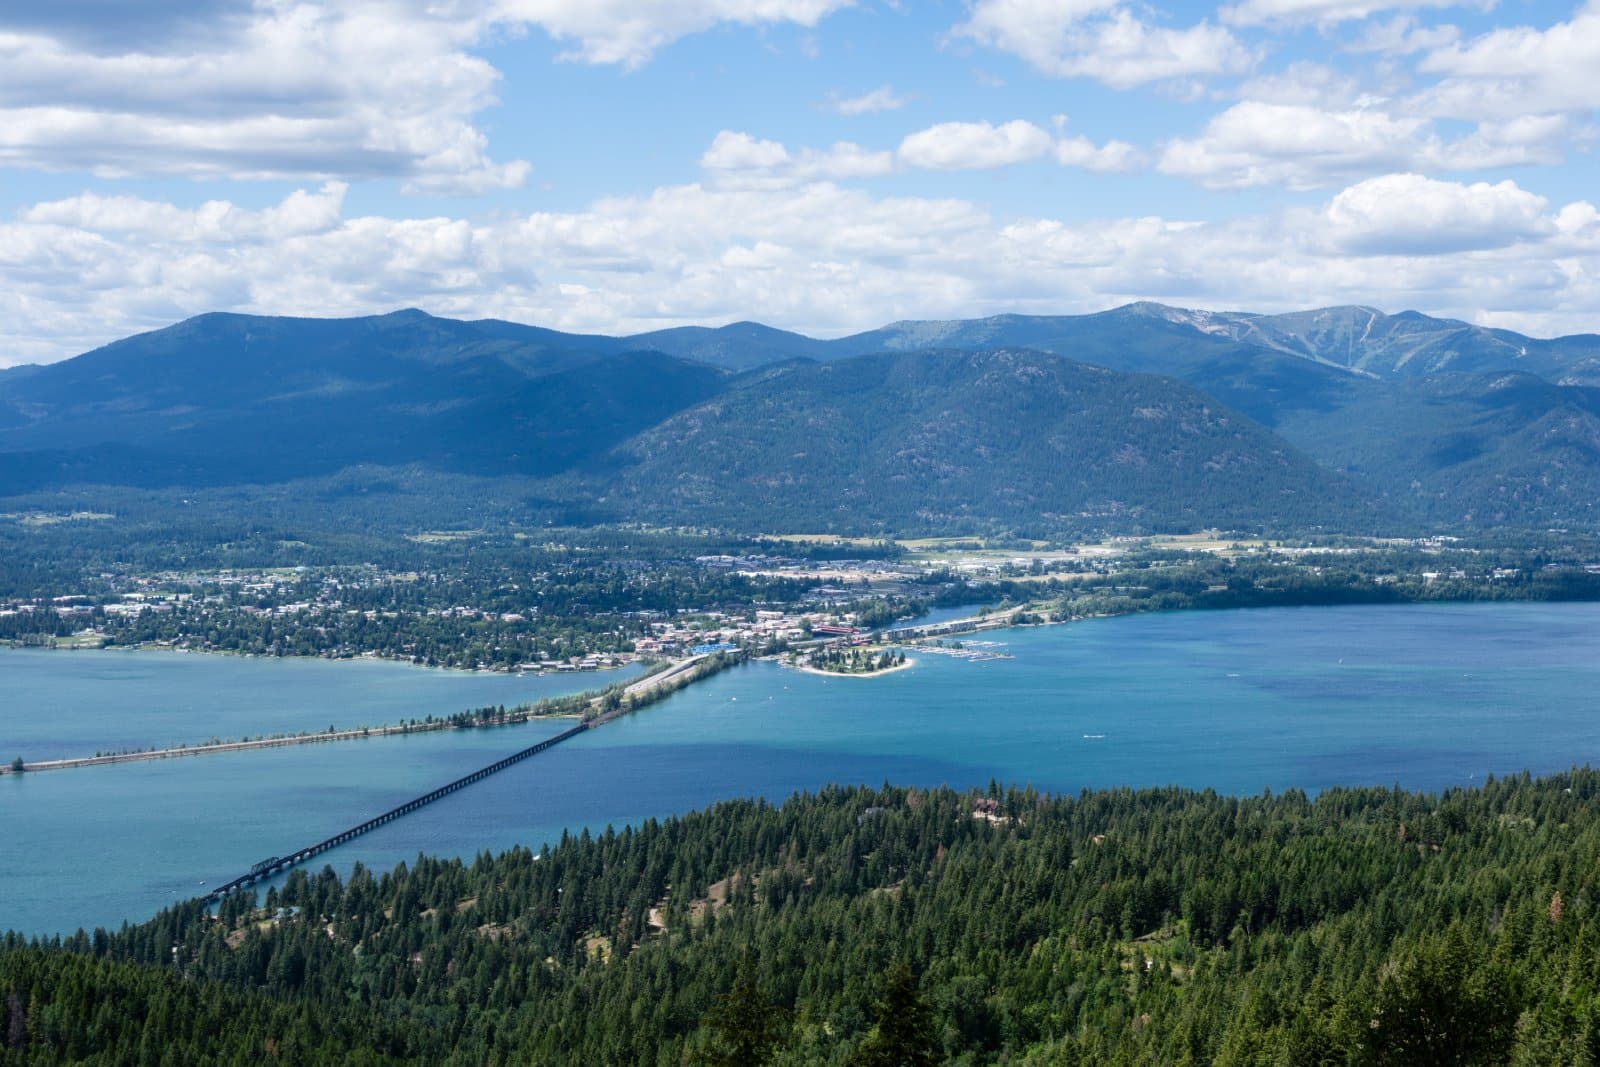 <p class="wp-caption-text">Image Credit: Shutterstock / Amehime</p>  <p><span><strong>Depth:</strong> 1,158 feet</span> <span>Idaho’s deepest lake is a stunning landscape for fishing, especially renowned for its giant Kamloops trout, amidst the backdrop of the Selkirk and Cabinet mountains.</span></p>